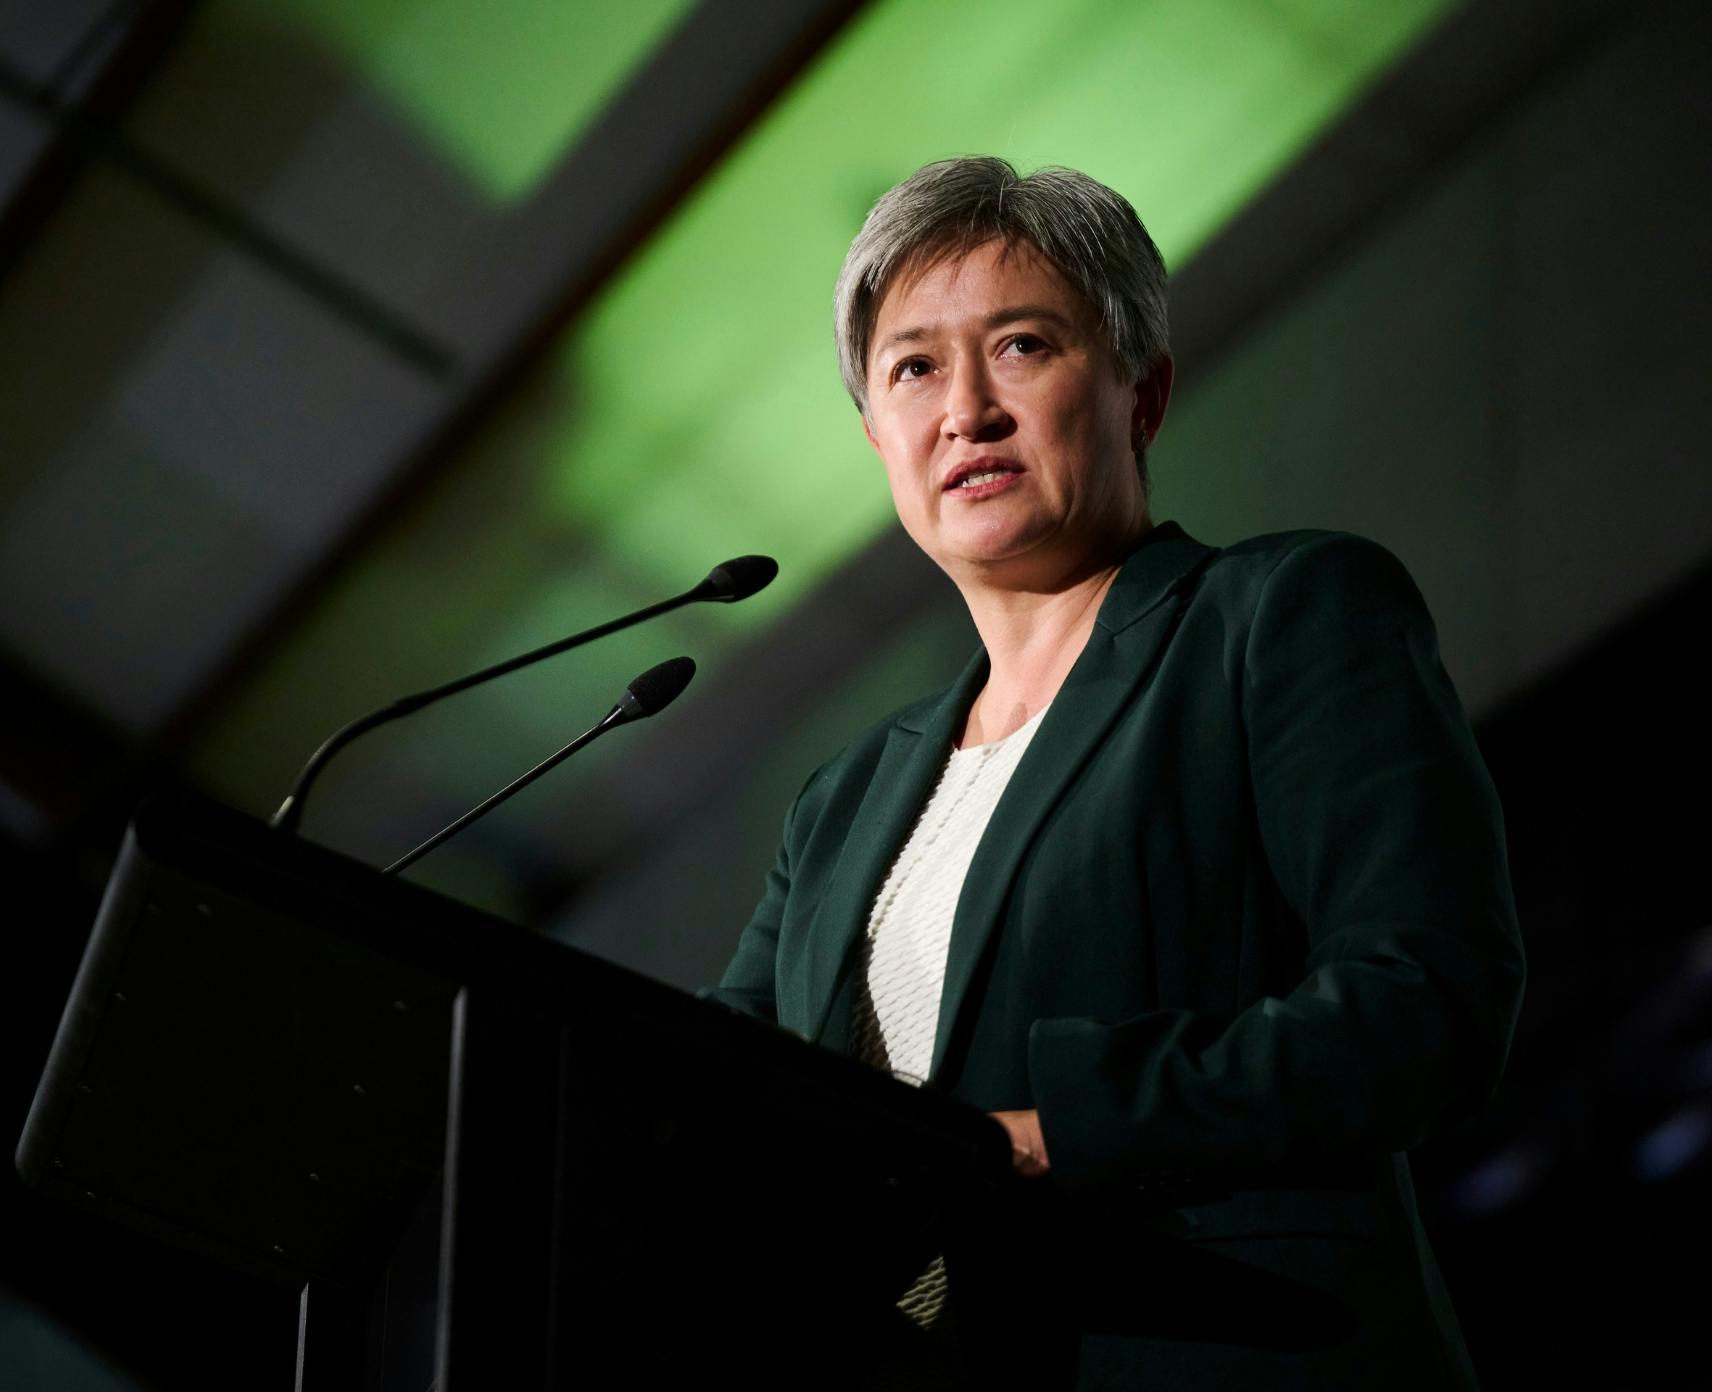 Penny Wong during her speech at the National Security College conference, 'Securing our Future'